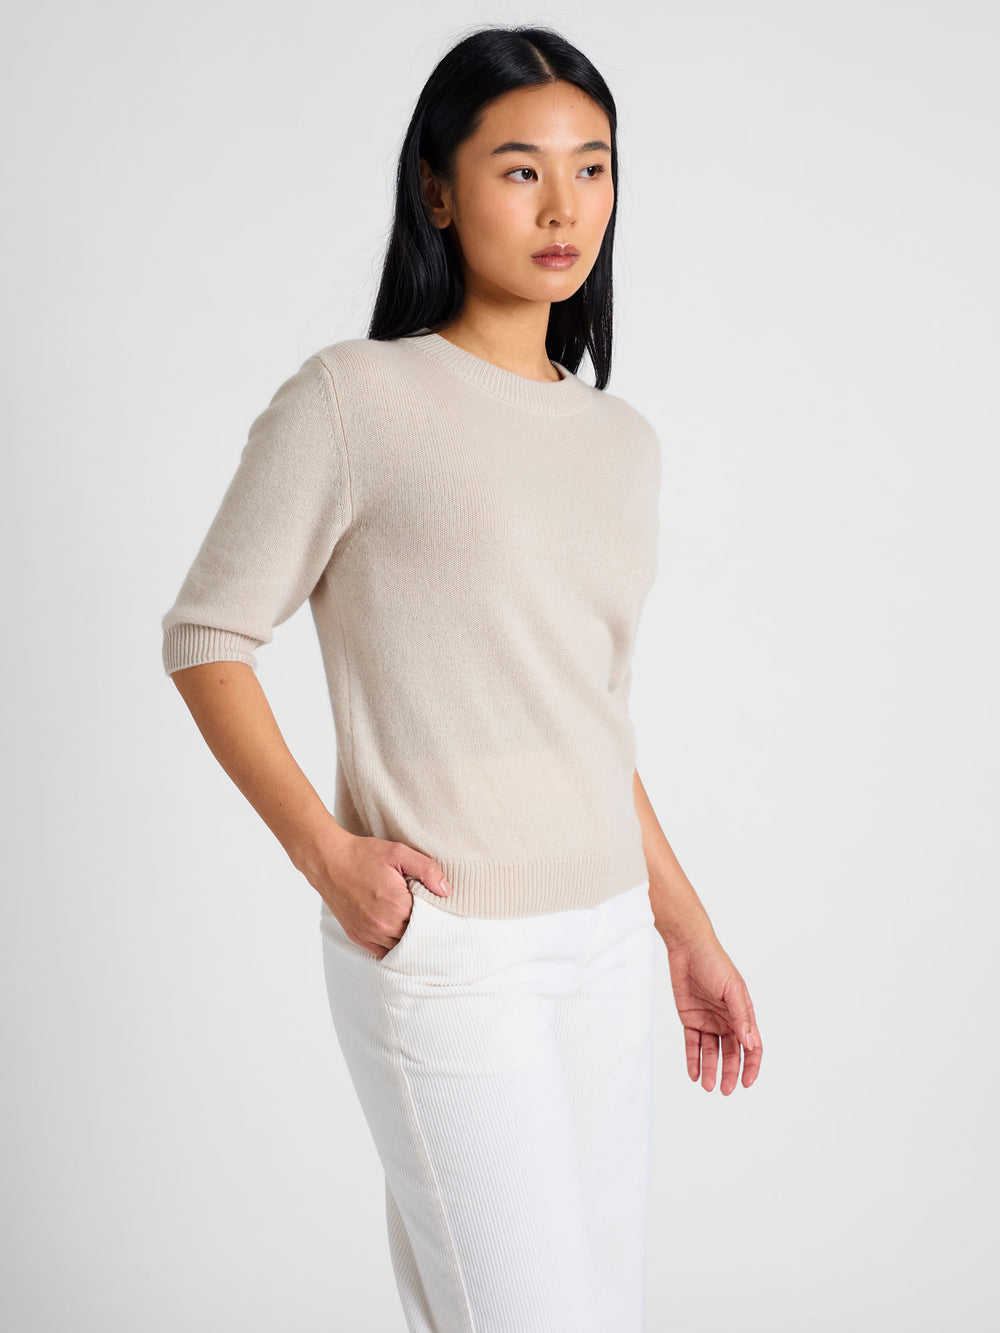 Short sleeved cashmere sweater "Aase" in 100% pure cashmere. Scandinavian design by Kashmina. Color: Cream.